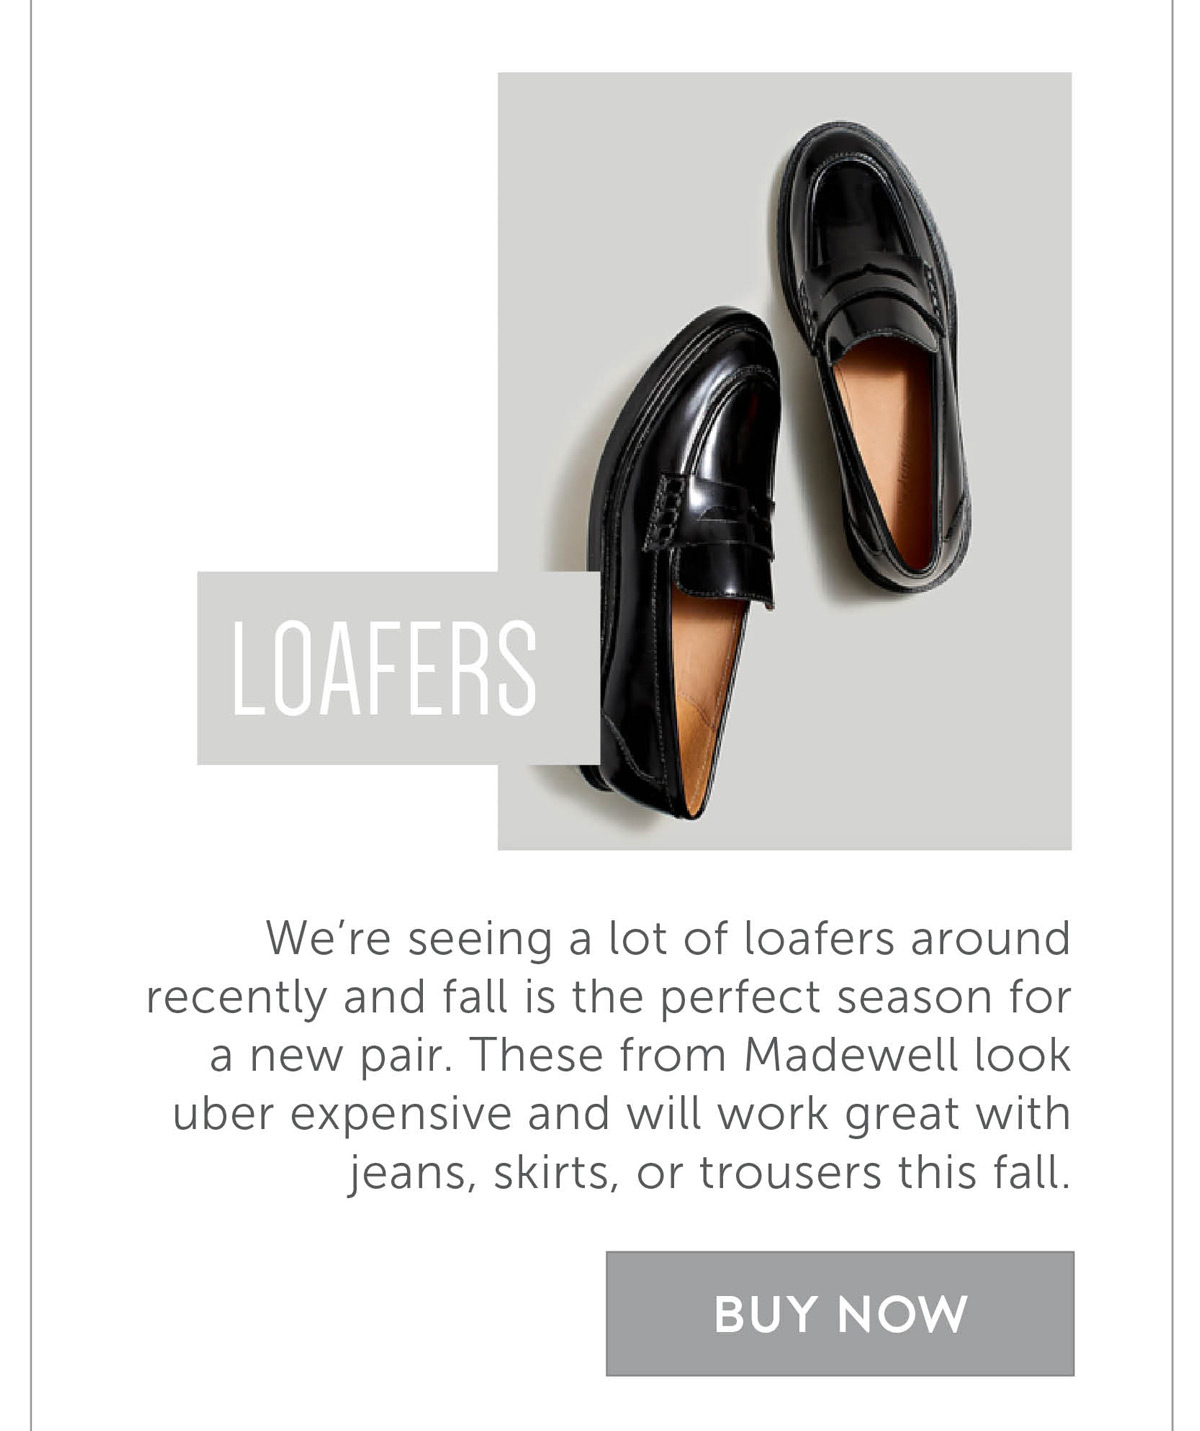 We’re seeing a lot of loafers around recently and fall is the perfect season for a new pair. These from Madewell look uber expensive and will work great with jeans, skirts, or trousers this fall.